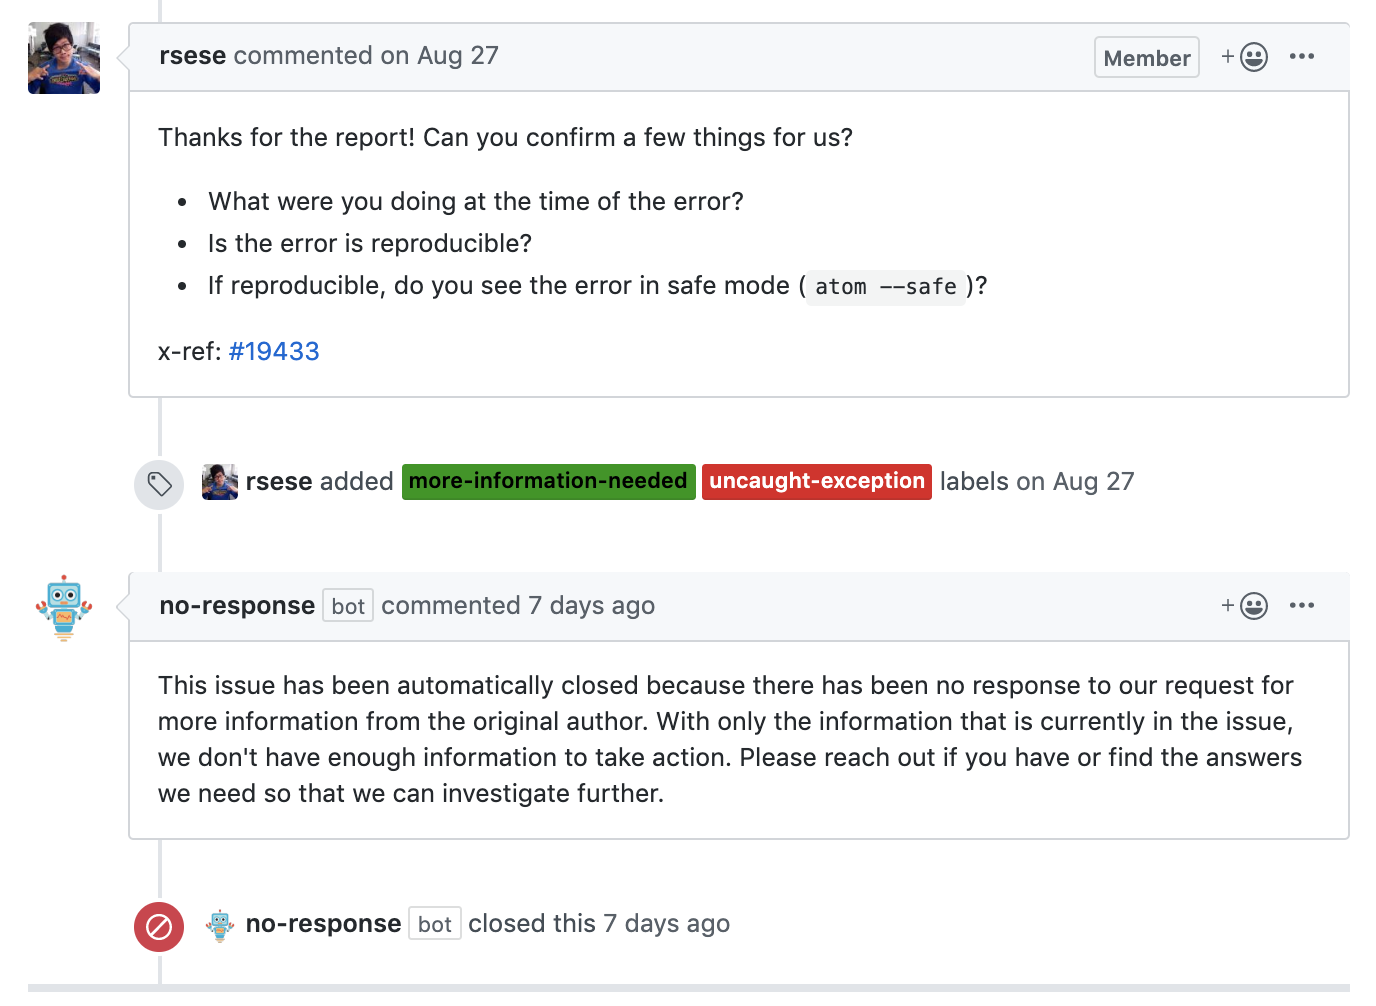 Screenshot of a bug report from the Atom Editor, in the form of a GitHub issue. User rsese asks for more information about a bug. no-response bot posts a comment letting the issue author know the issue will be closed due to lack of activity, and then closed the issue.